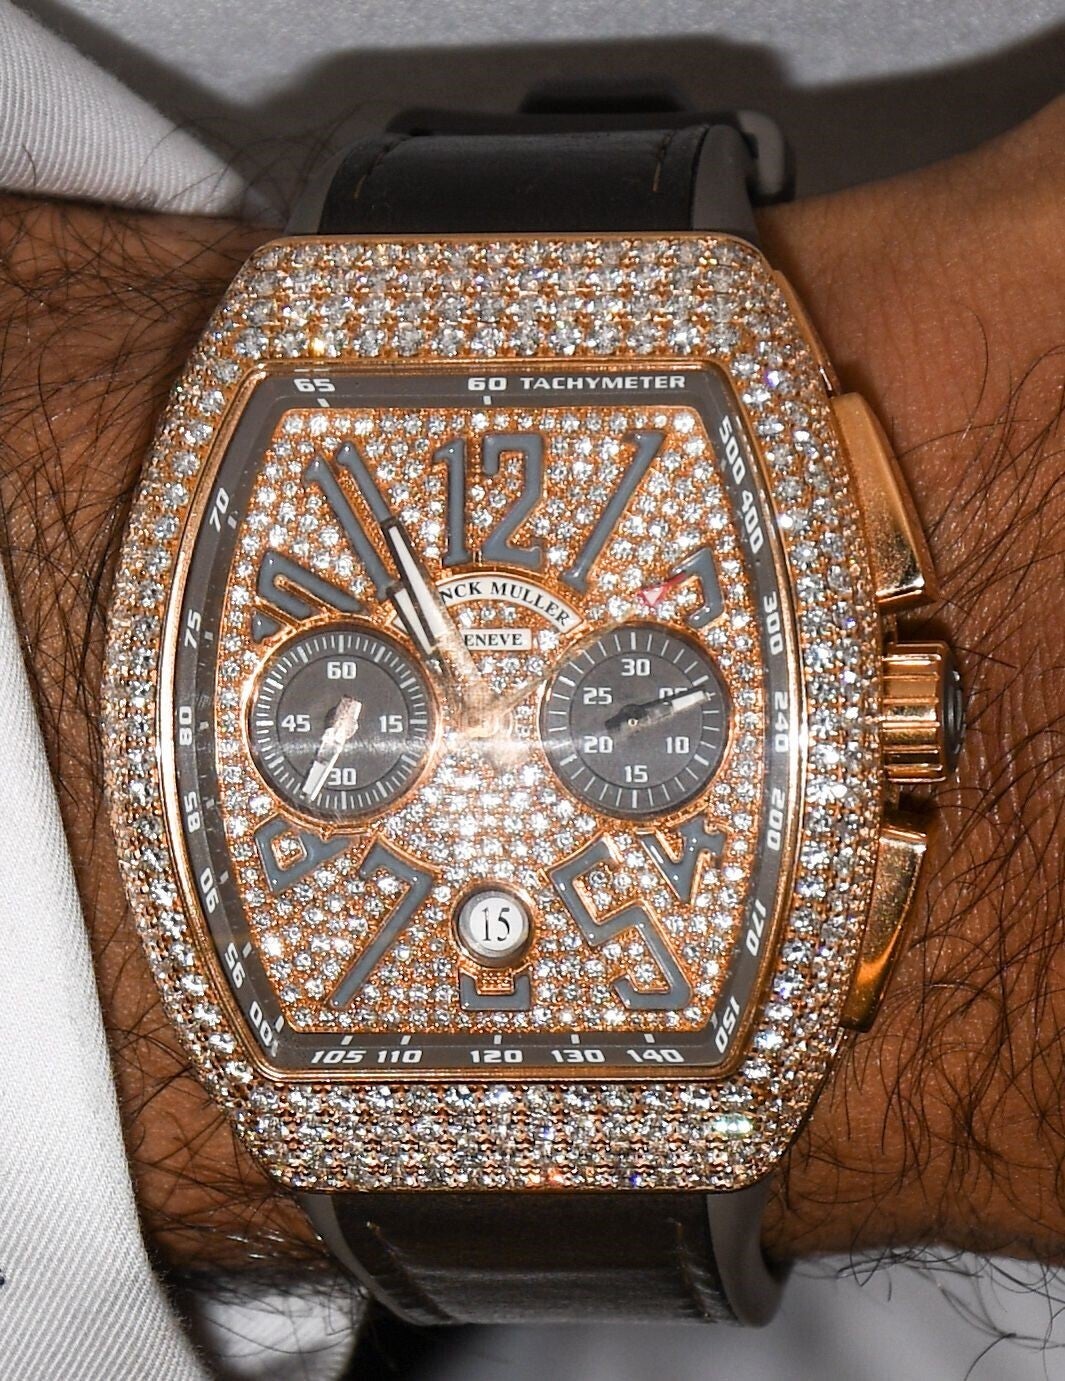 The Franck Muller watch was custom-made for Amir Khan and worth around £70,000